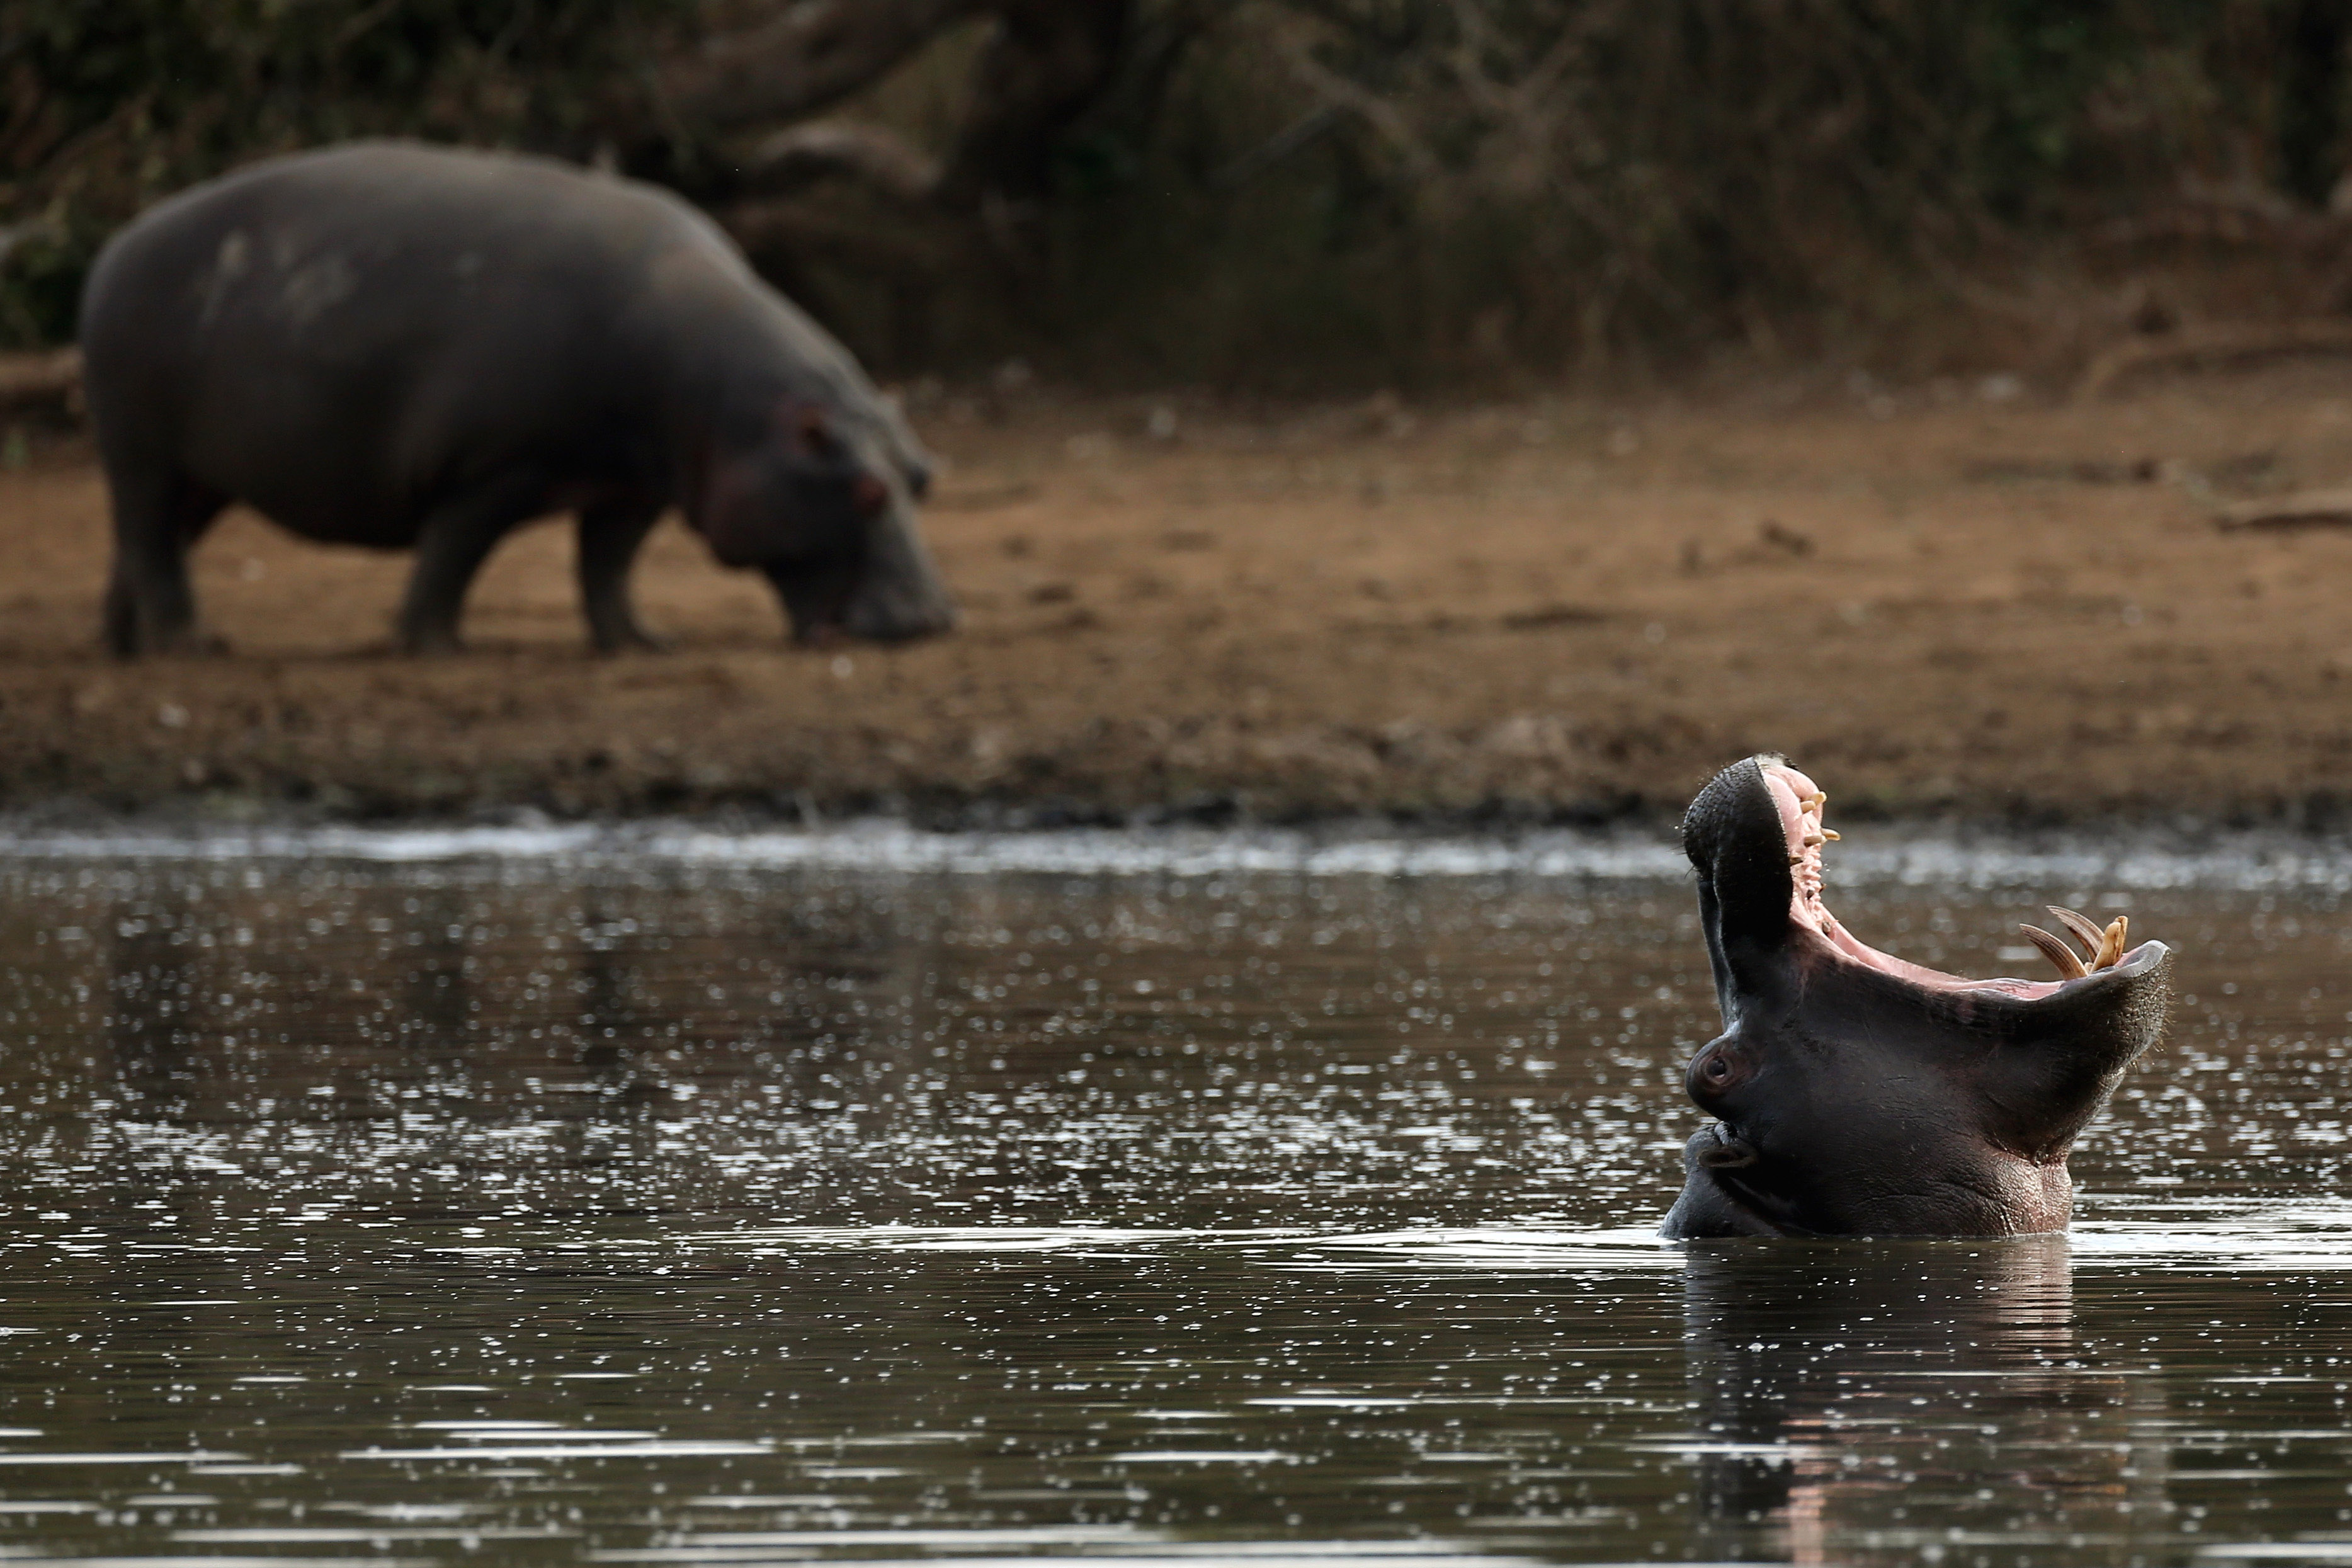 LOWER SABIE, SOUTH AFRICA - JULY 08: A Hippopotamus yawns in Krugar National Park on July 8, 2013 in Lower Sabie, South Africa. The Kruger National Park was established in 1898, and is South Africa's premier wildlife park, spanning an area of approximately 2 million hectares. (Photo by Dan Kitwood/Getty Images)